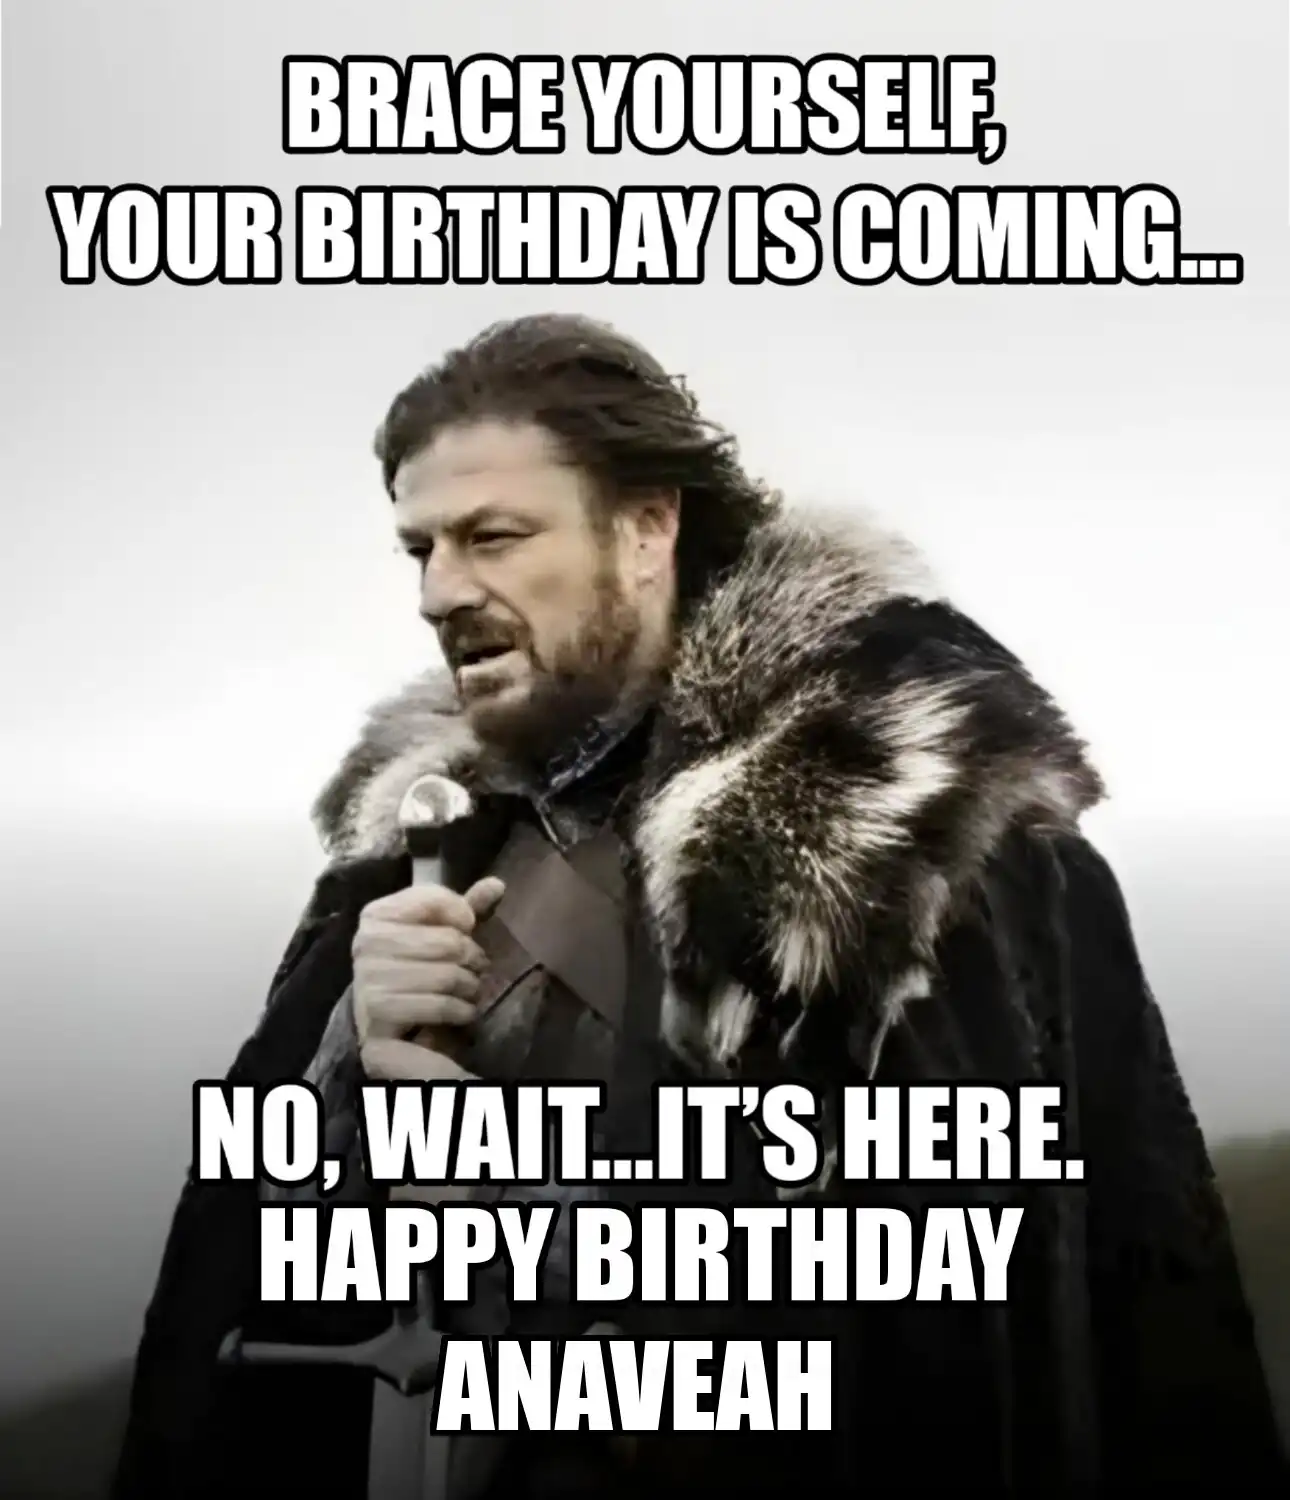 Happy Birthday Anaveah Brace Yourself Your Birthday Is Coming Meme